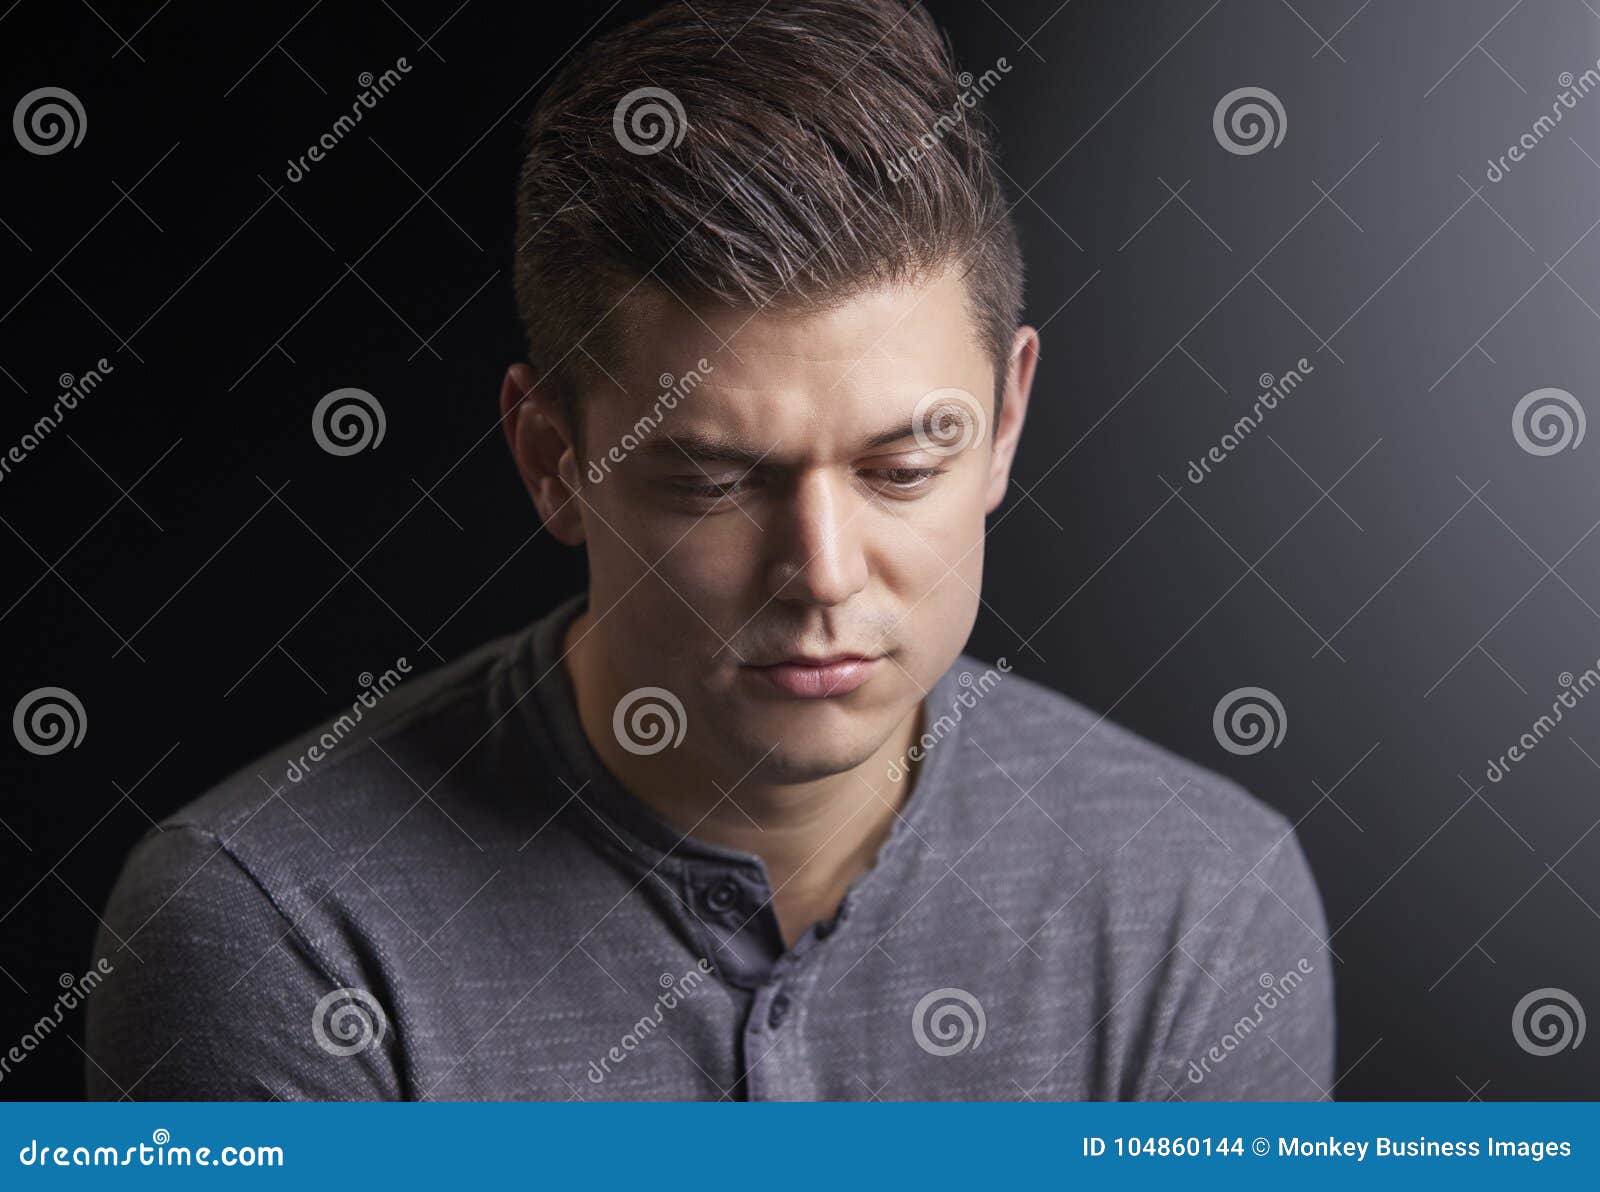 Portrait Of A Worried Young Man Looking Down Stock Photo - Image of ...